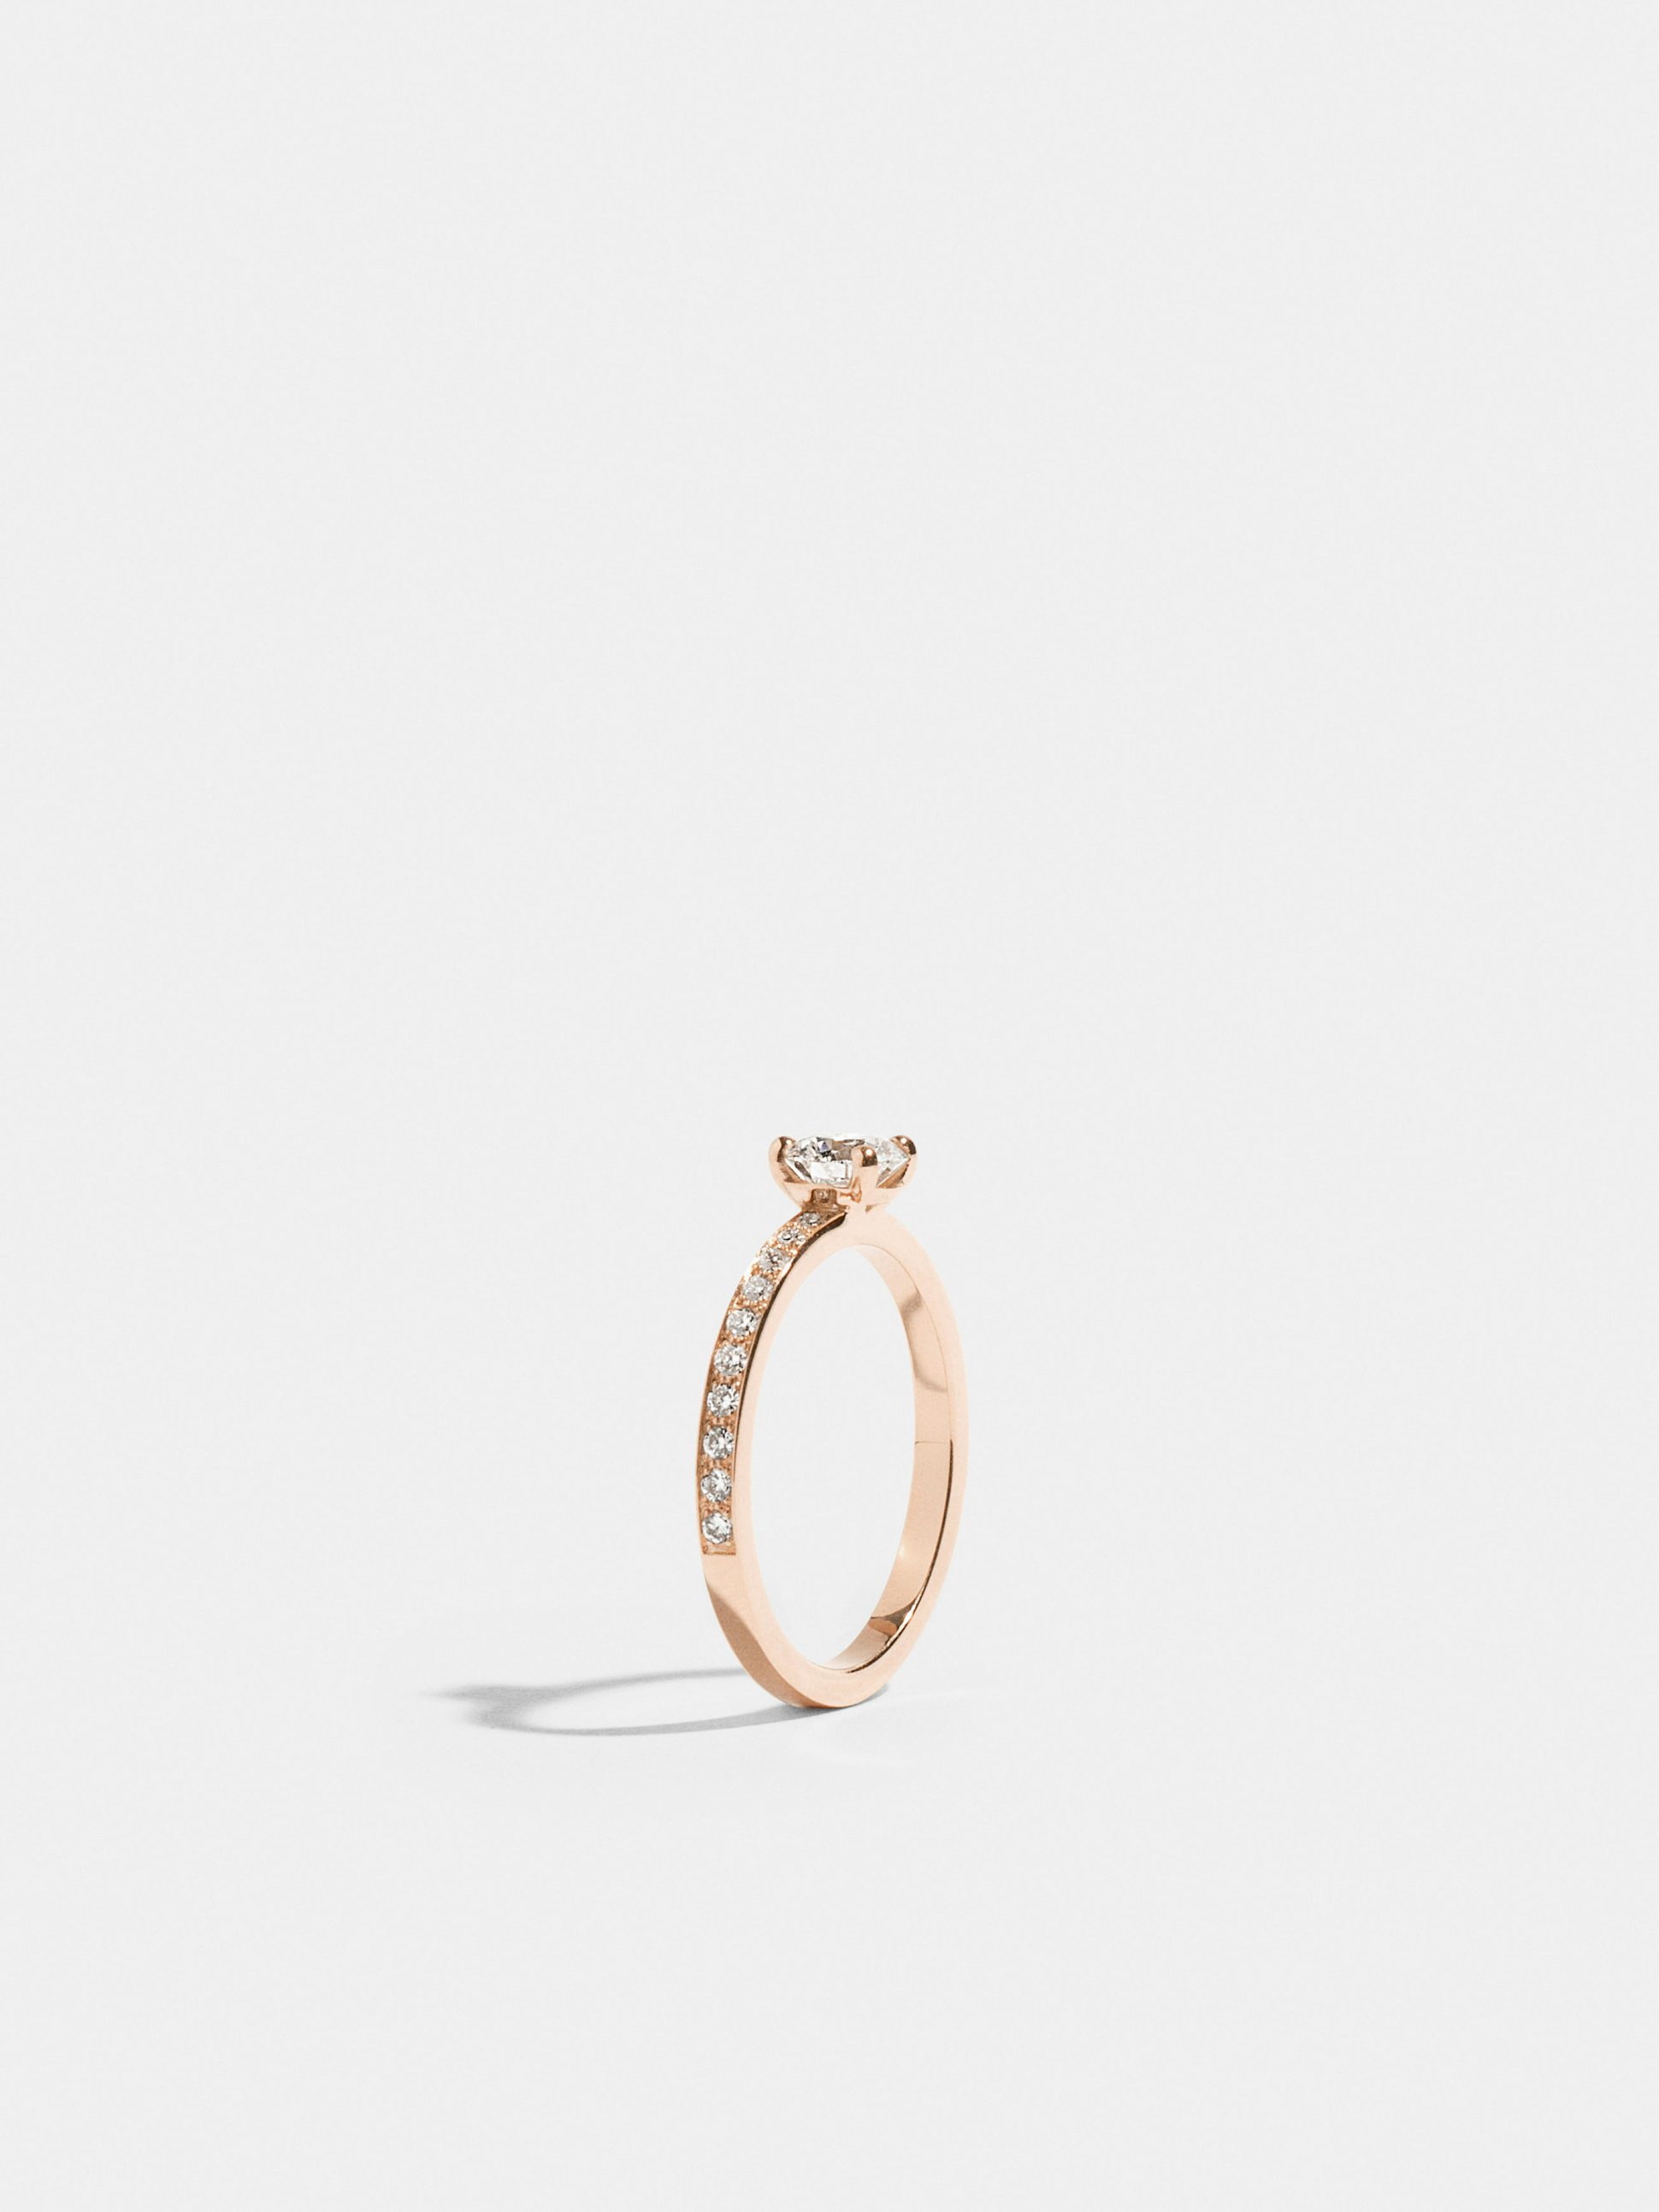 Solitaire Anagramme flat ribbon in rose gold 18k Fairmined ethical, paved and set with a 0.50 carat brilliant cut labgrown diamond